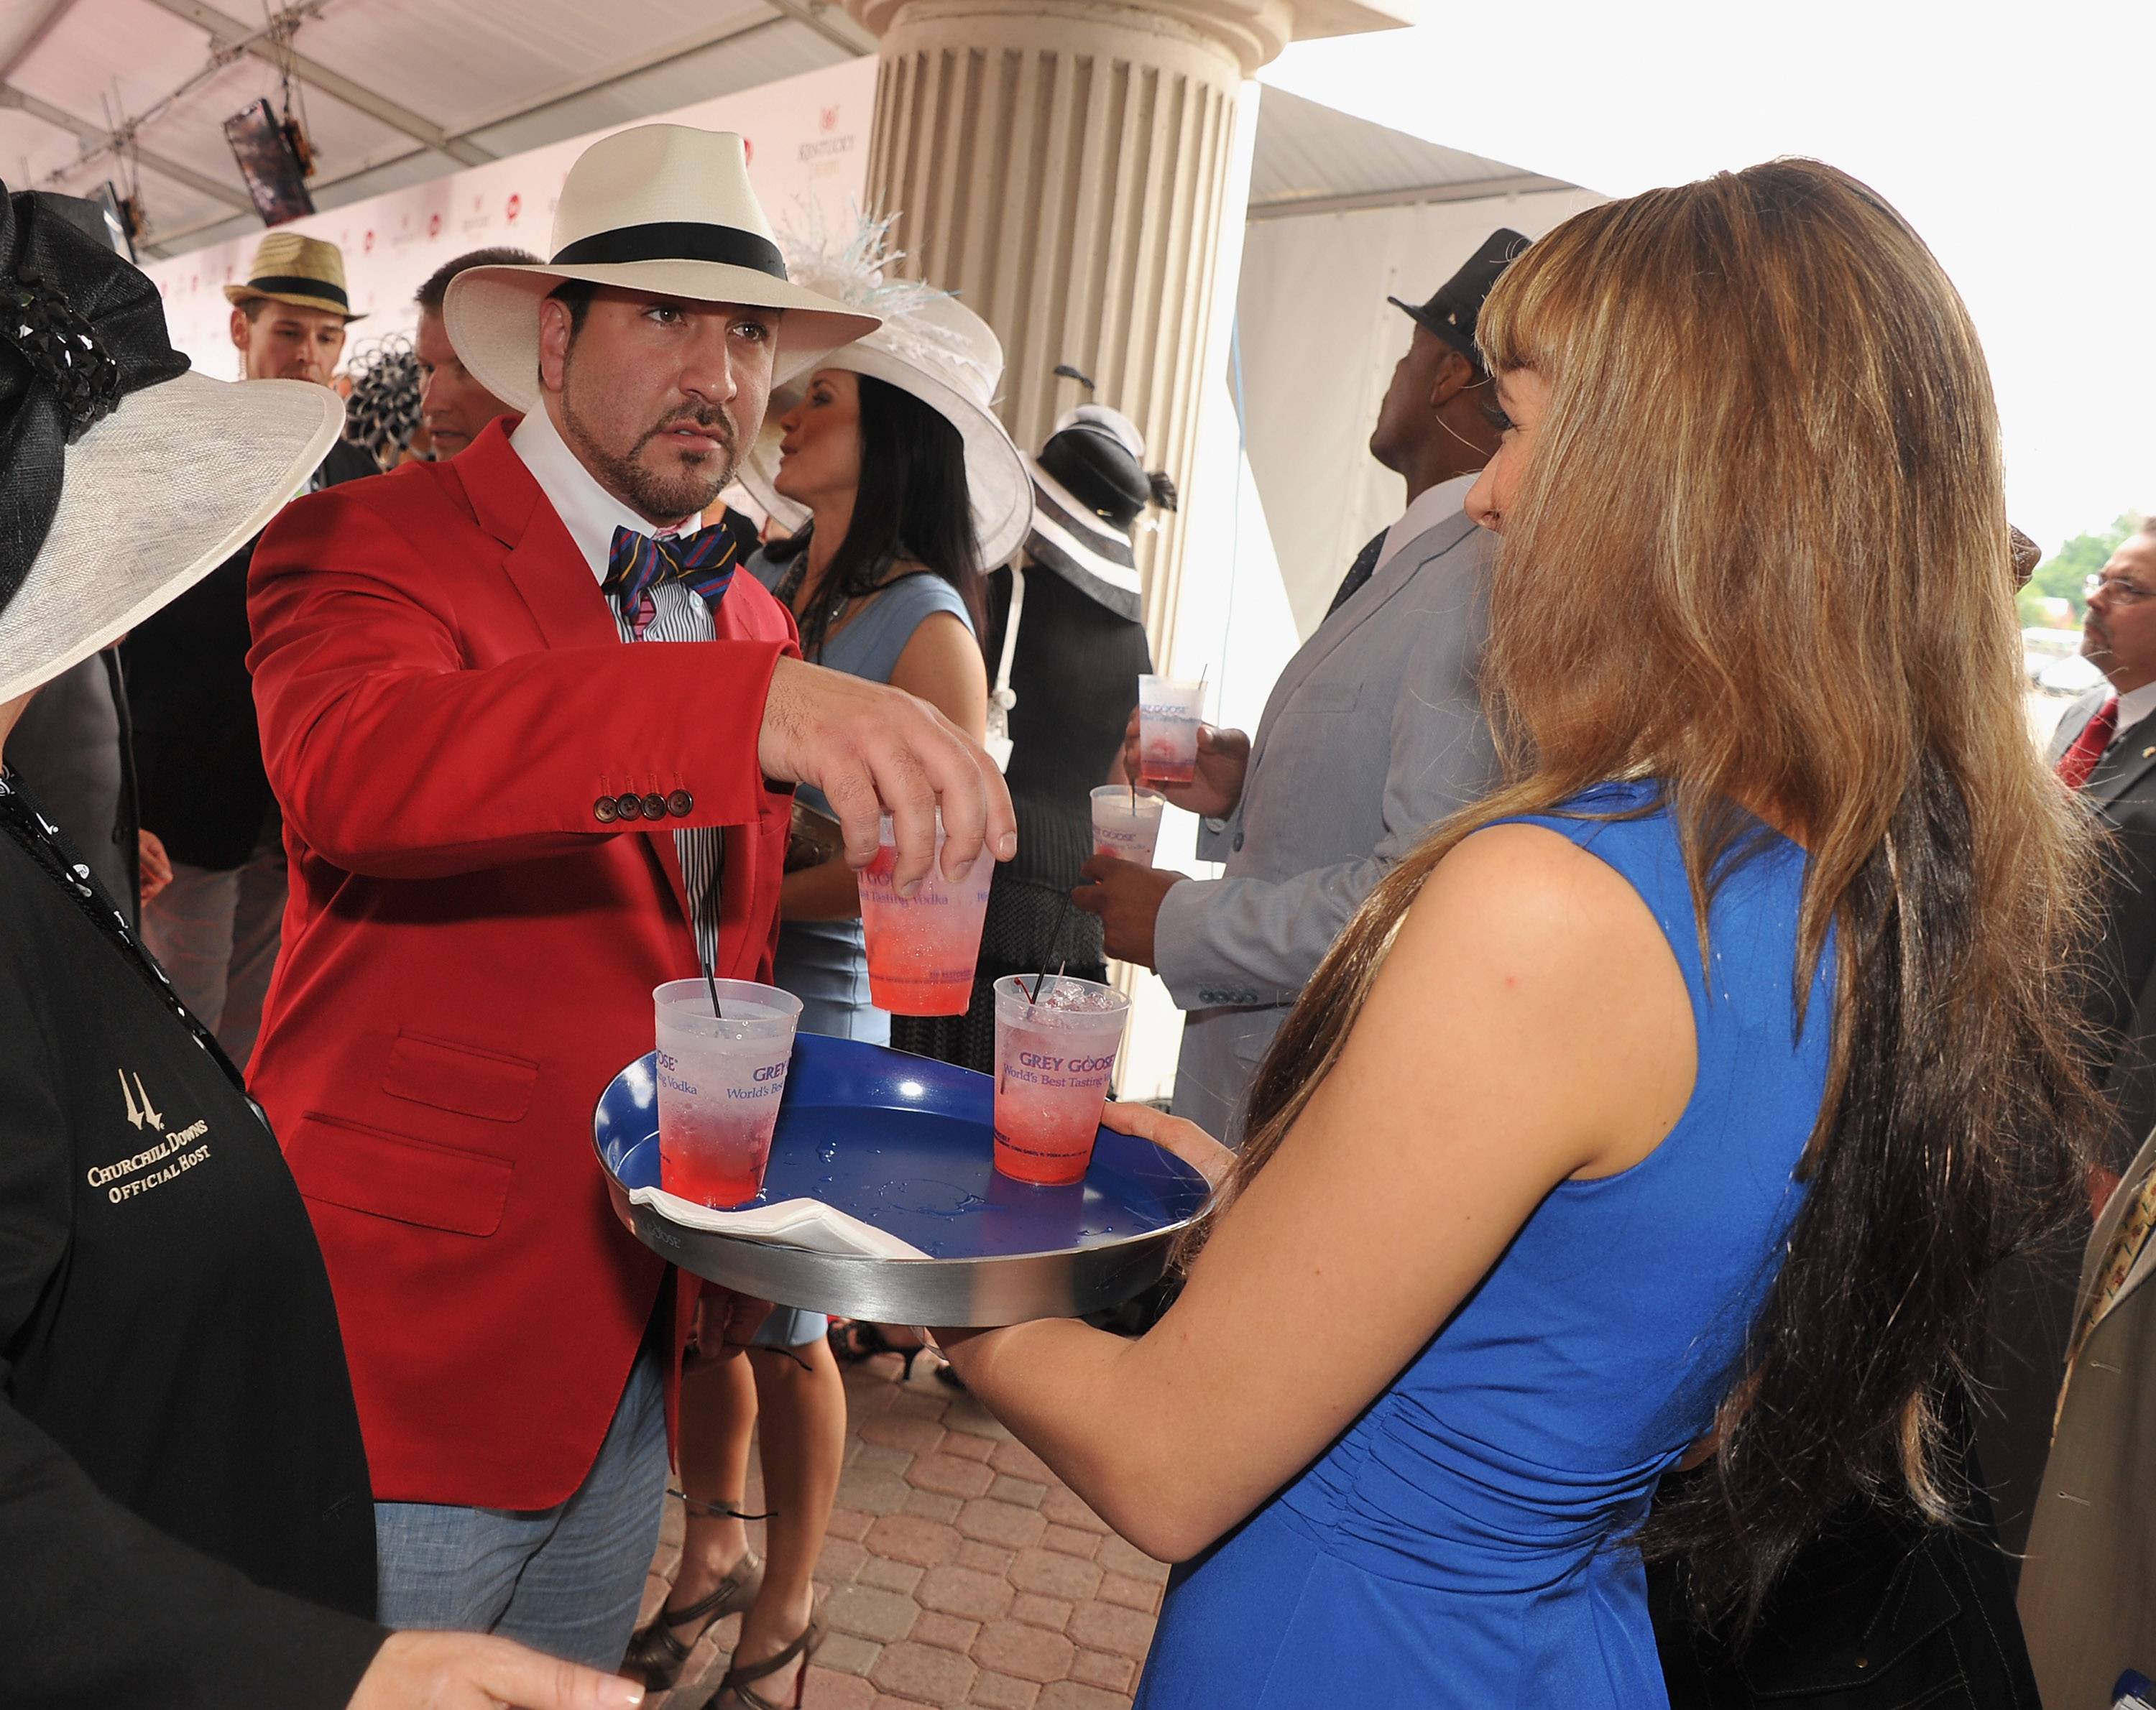 Joey Fatone  at the GREY GOOSE Vodka Lounge at the 138th Running of the Kentucky Derby.